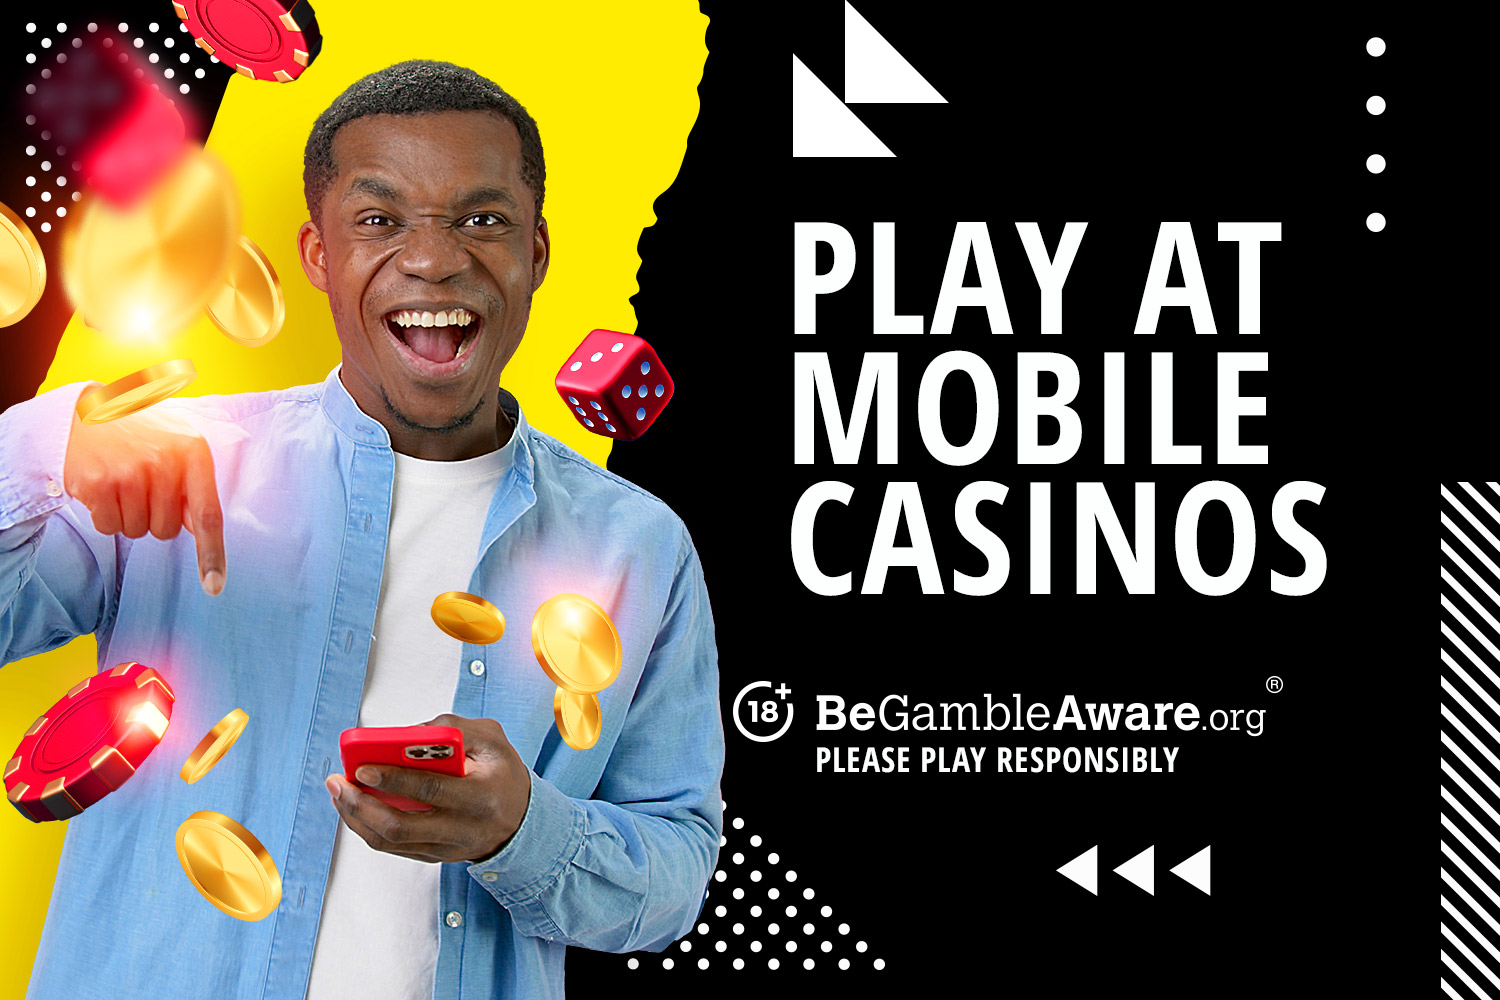 Play at mobile casinos. 18+ BeGambleAware.org - please play responsibly.